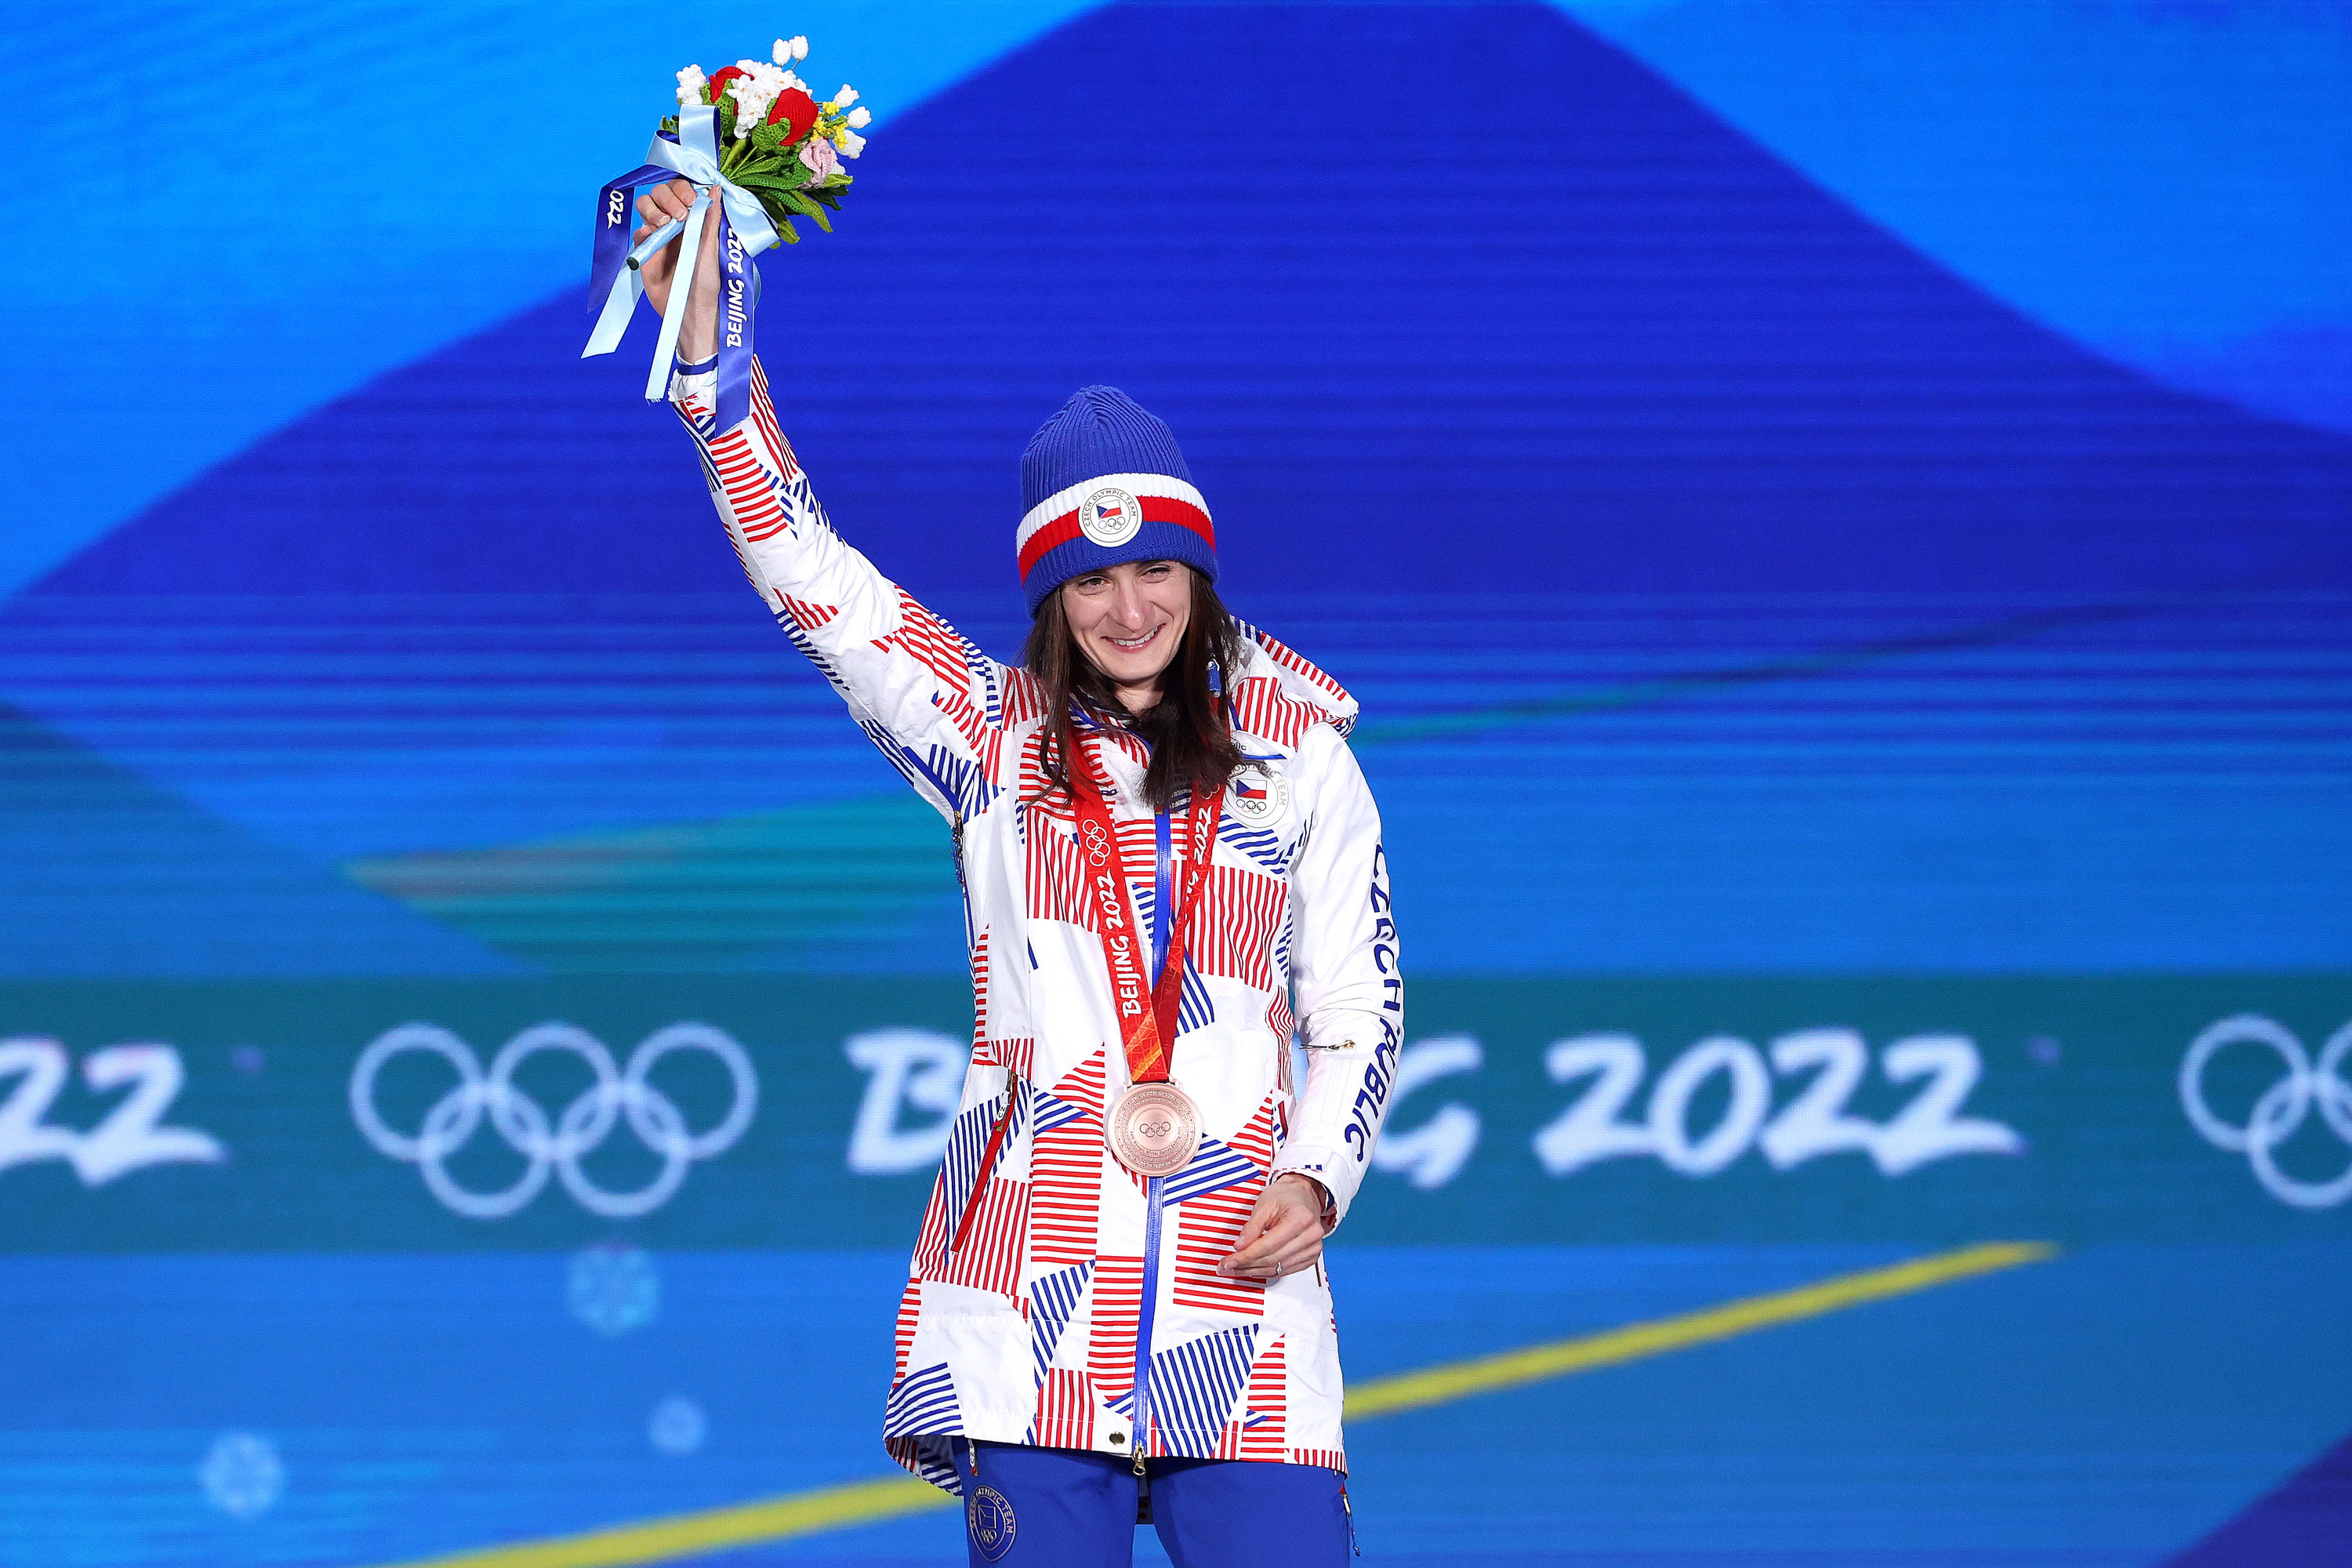 An athlete from the Czech Republic holding up her bouquet and acknowledging the crowd during the medal ceremony